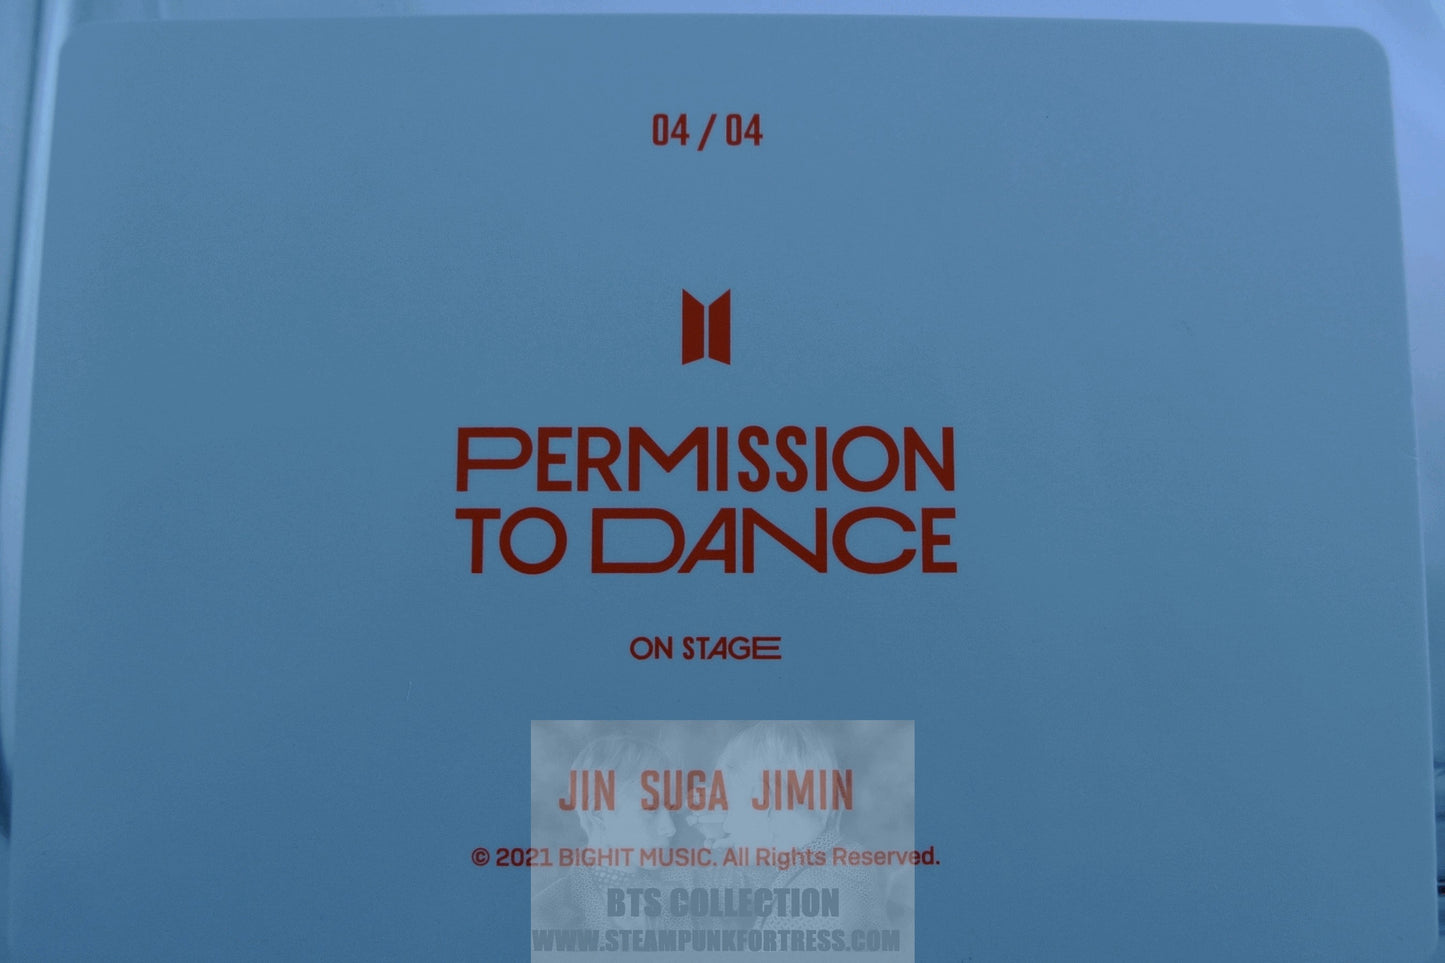 BTS PERMISSION TO DANCE ON STAGE PTD JIN KIM SEOKJIN JIMIN PARK SUGA MIN YOONGI 2021 PHOTOCARD PHOTO CARD #4 OF 4 NEW OFFICIAL GROUP UNIT MERCHANDISE